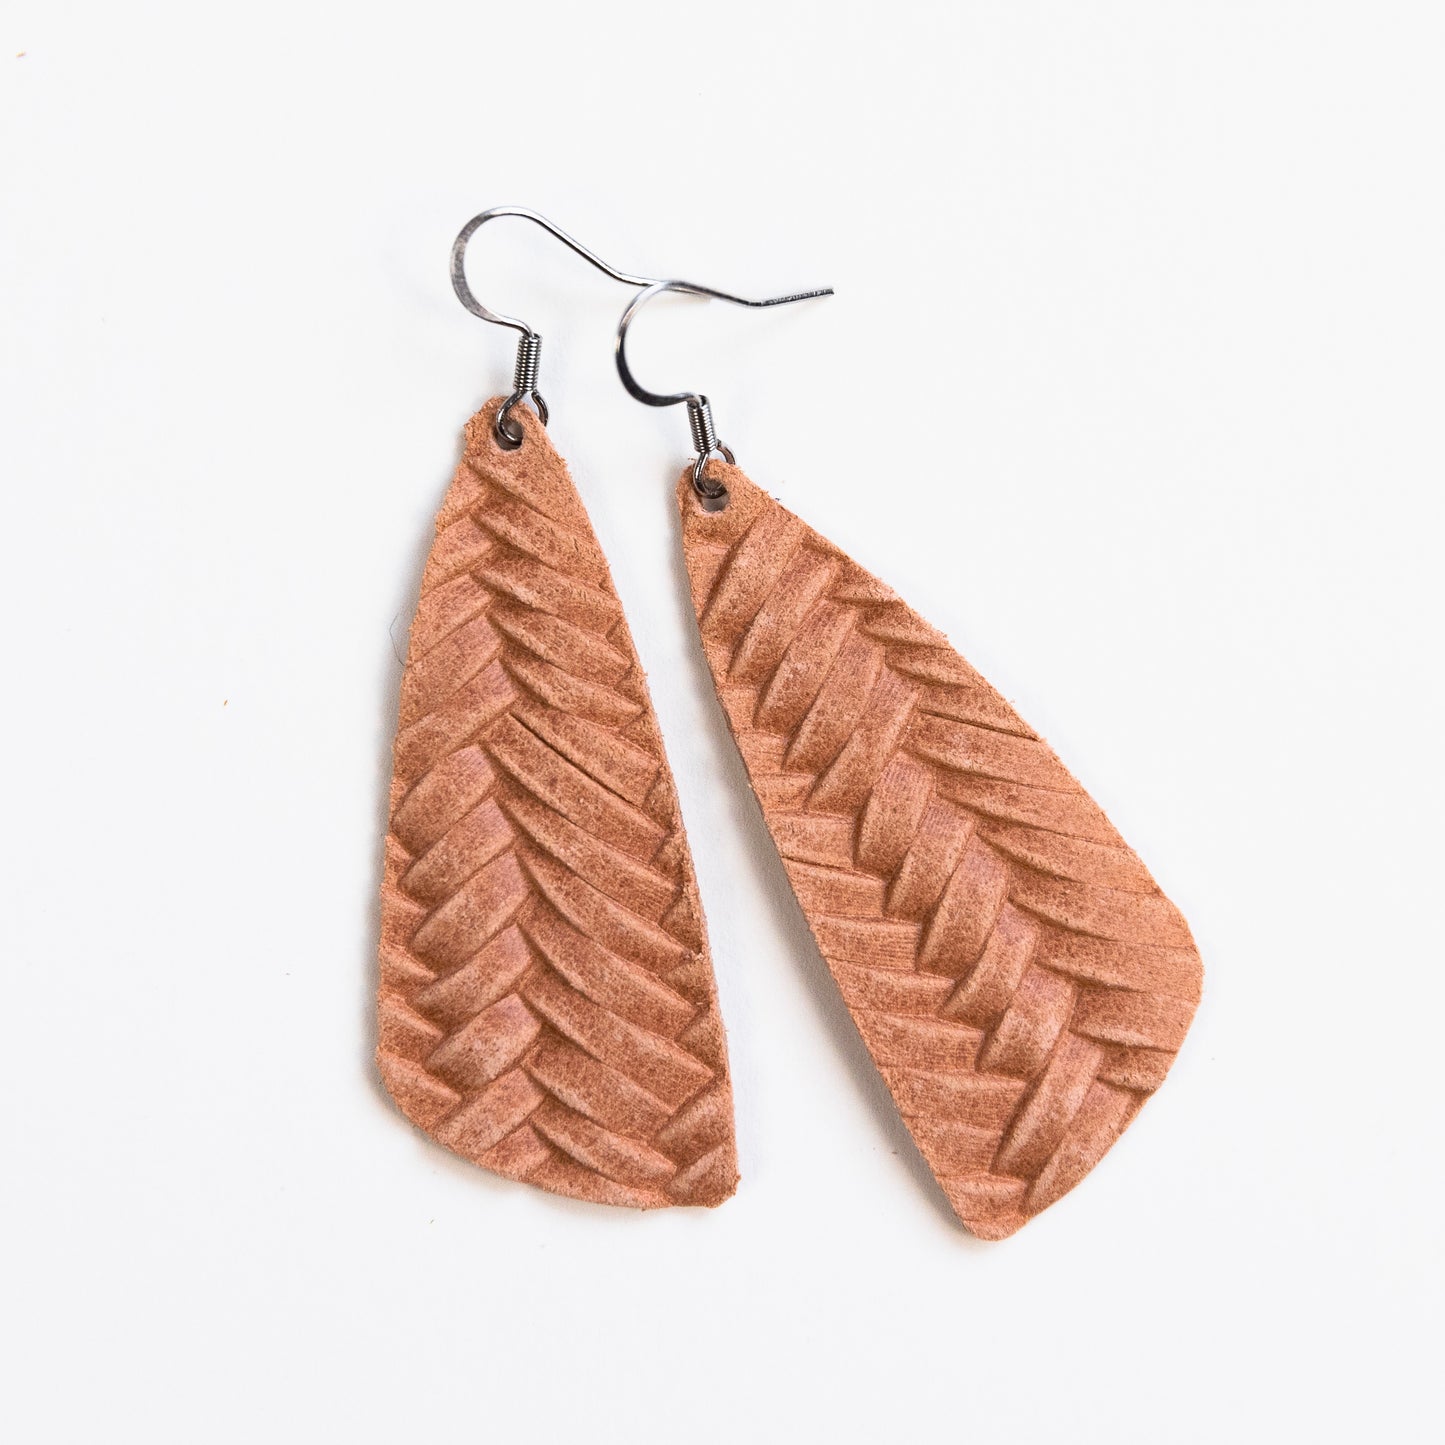 The Braided Wedge in Nude Peach/ Lightweight Leather Statement Earrings